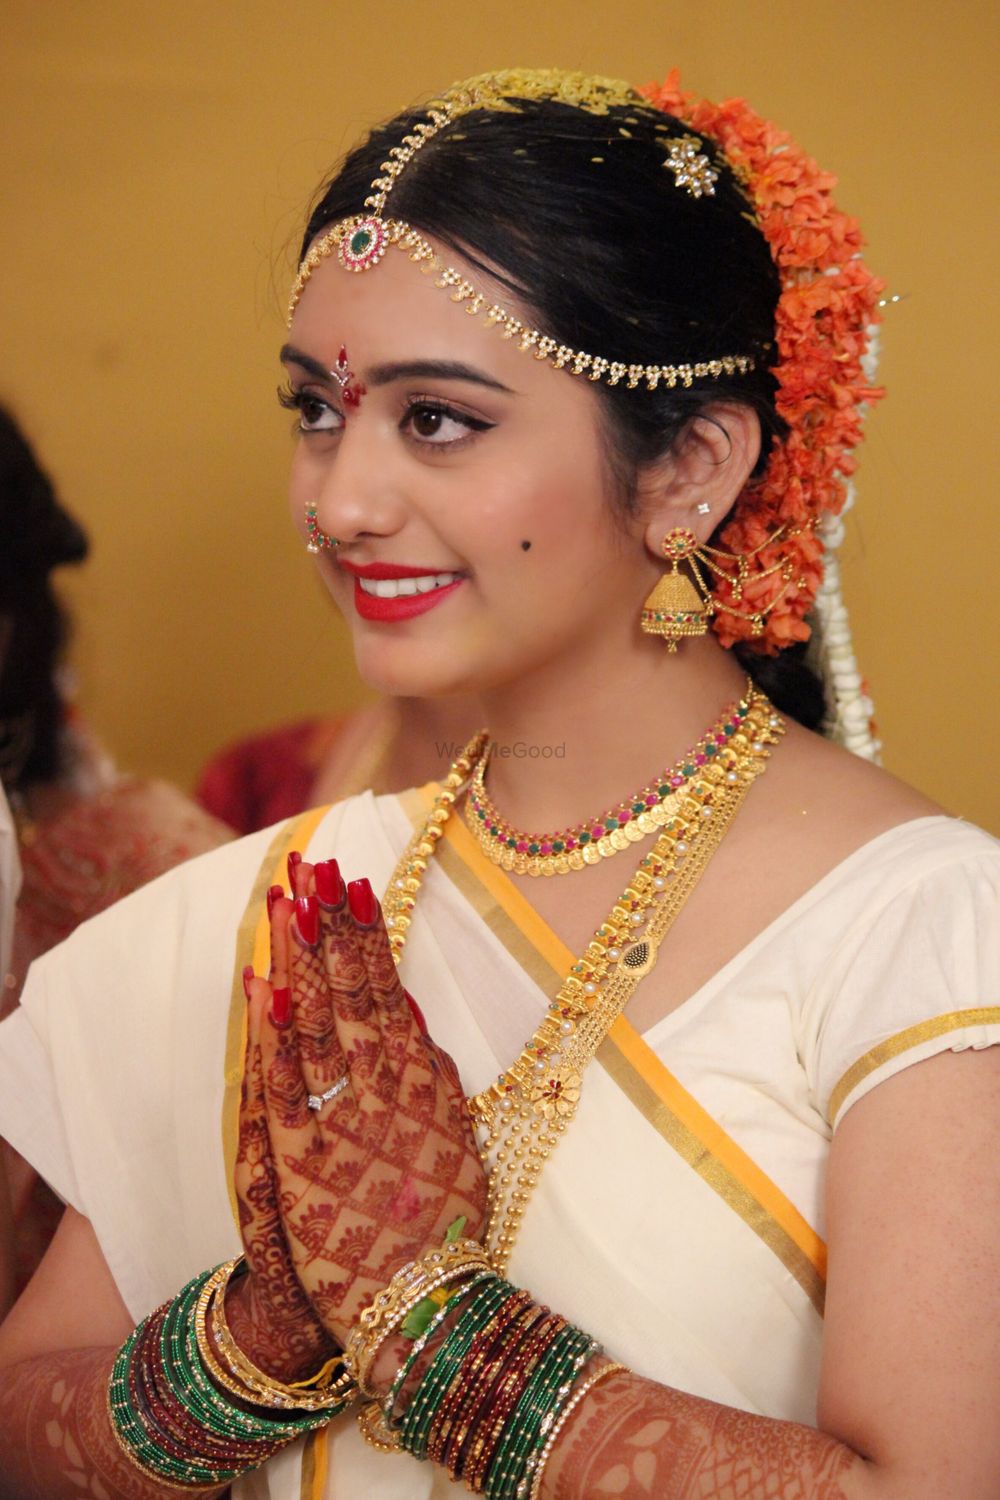 Photo By Wing That Liner by Sneha Sakya - Bridal Makeup